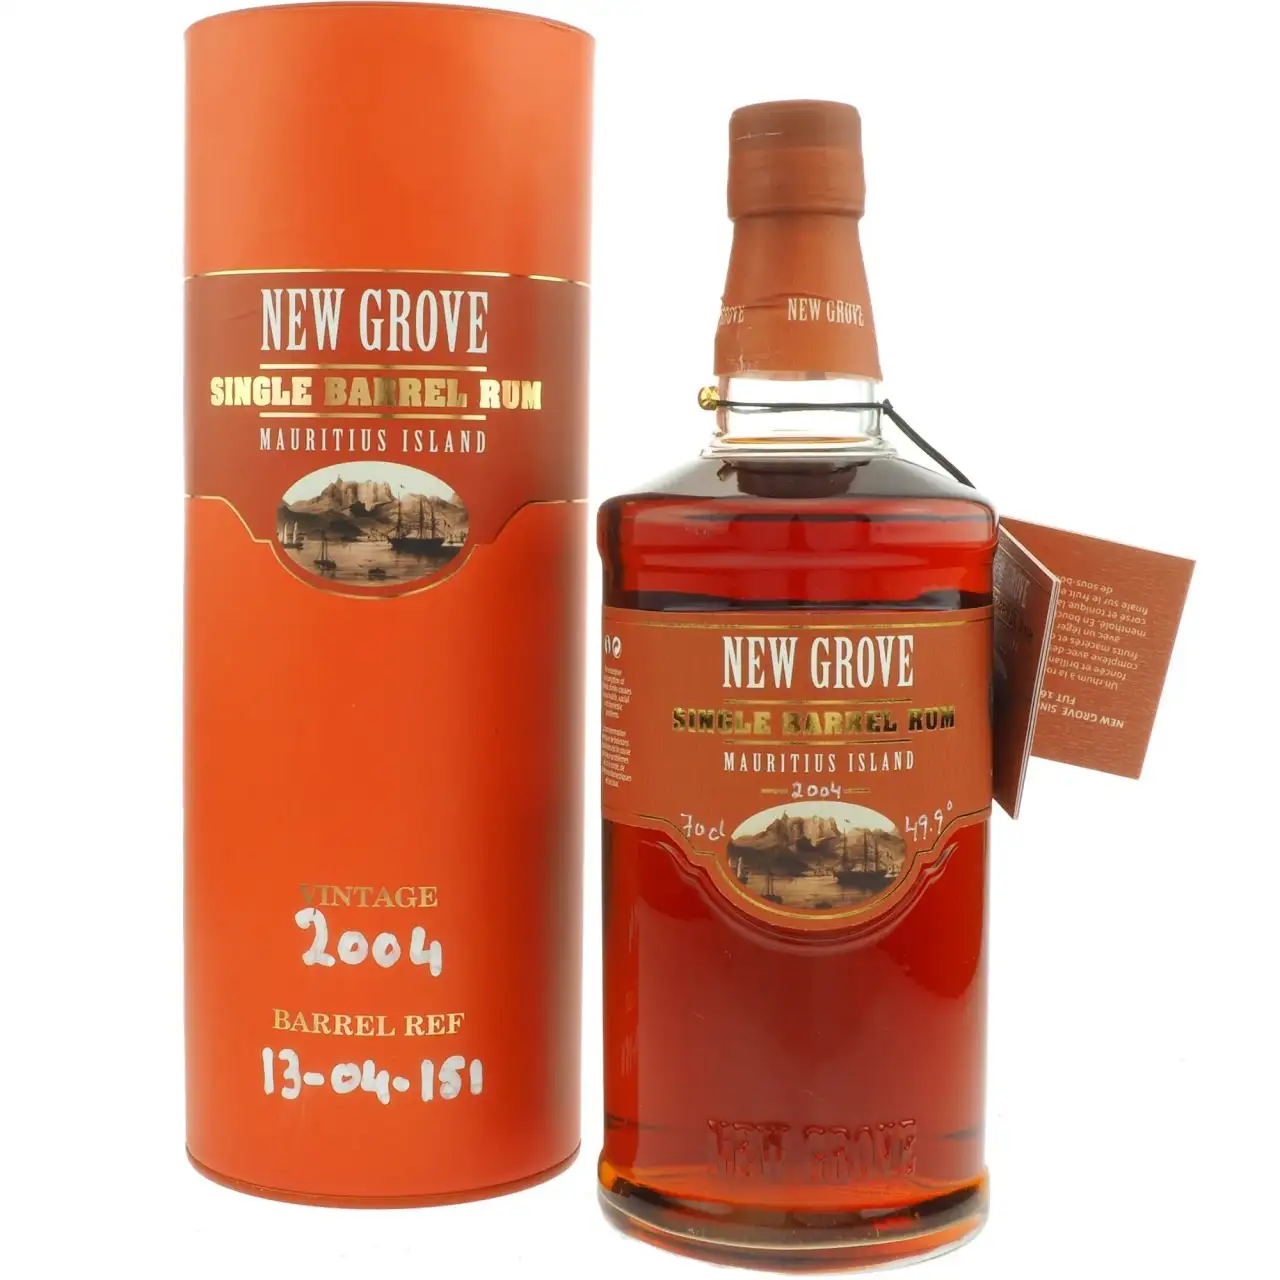 Image of the front of the bottle of the rum New Grove Single Cask Rum